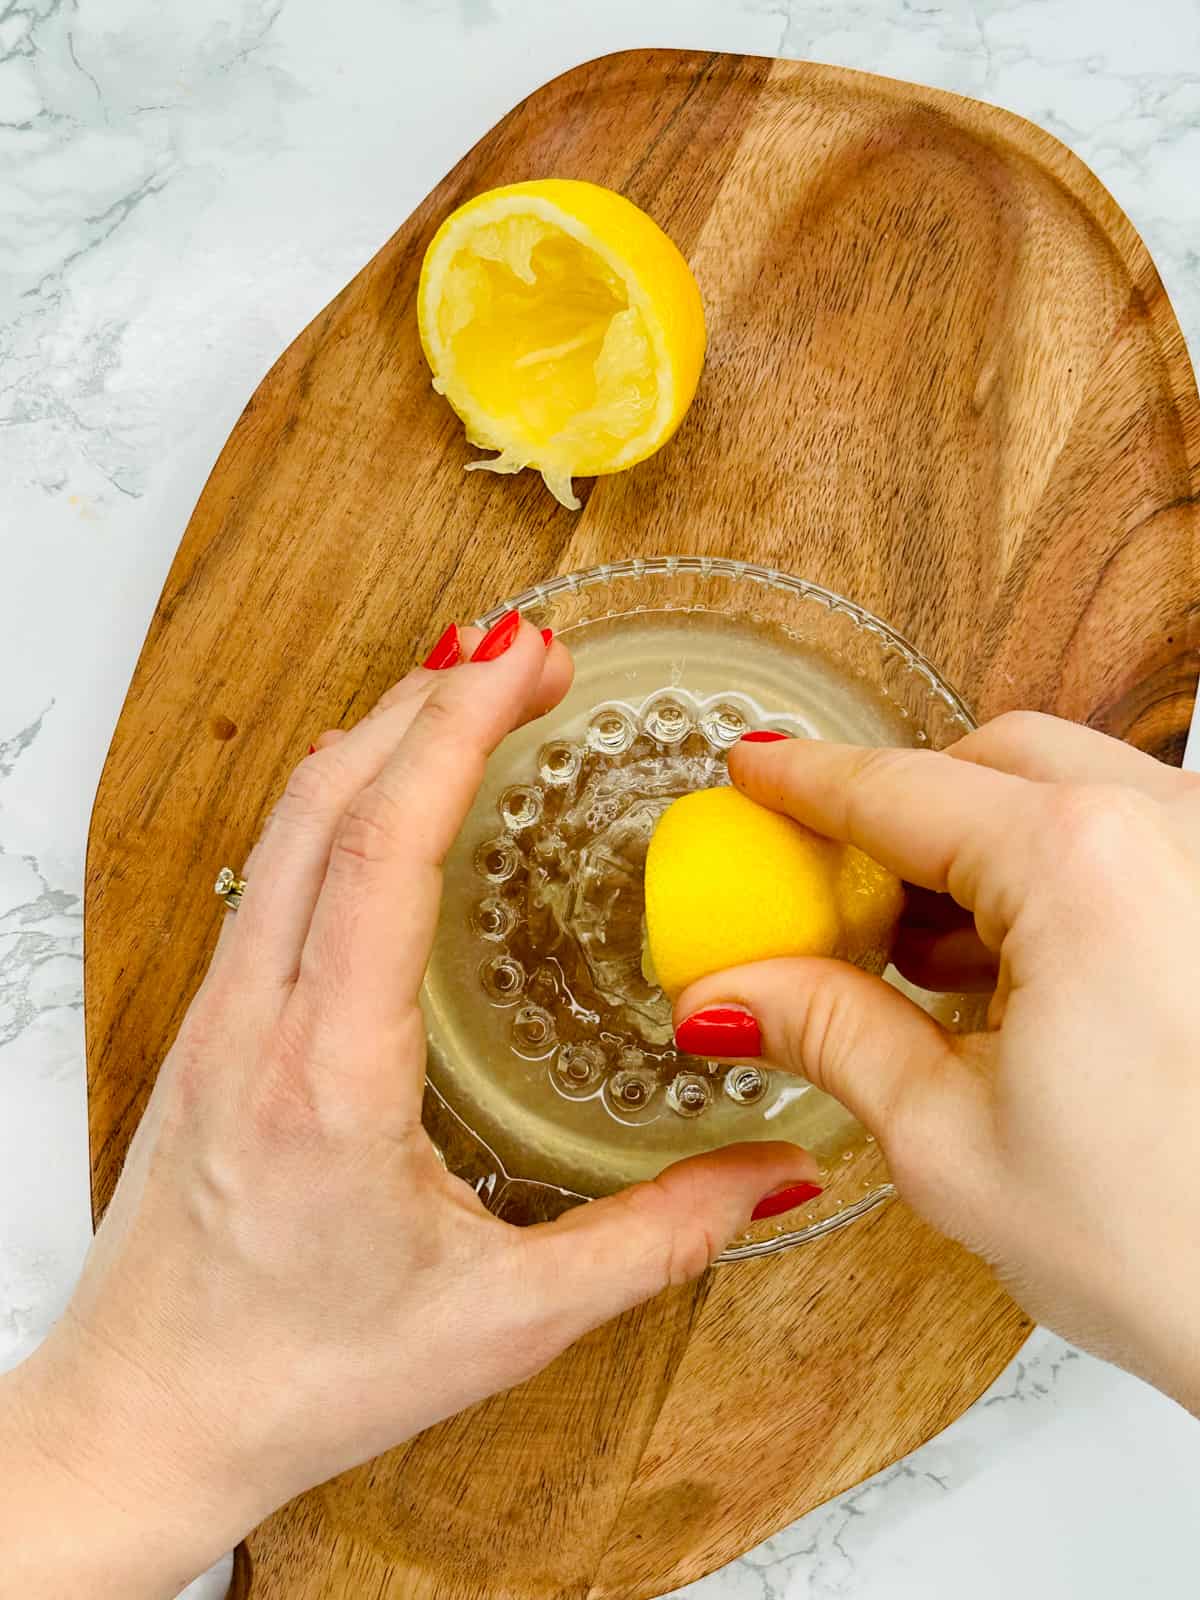 a hand juicing a lemon with a glass juicer on a wooden chopping board 